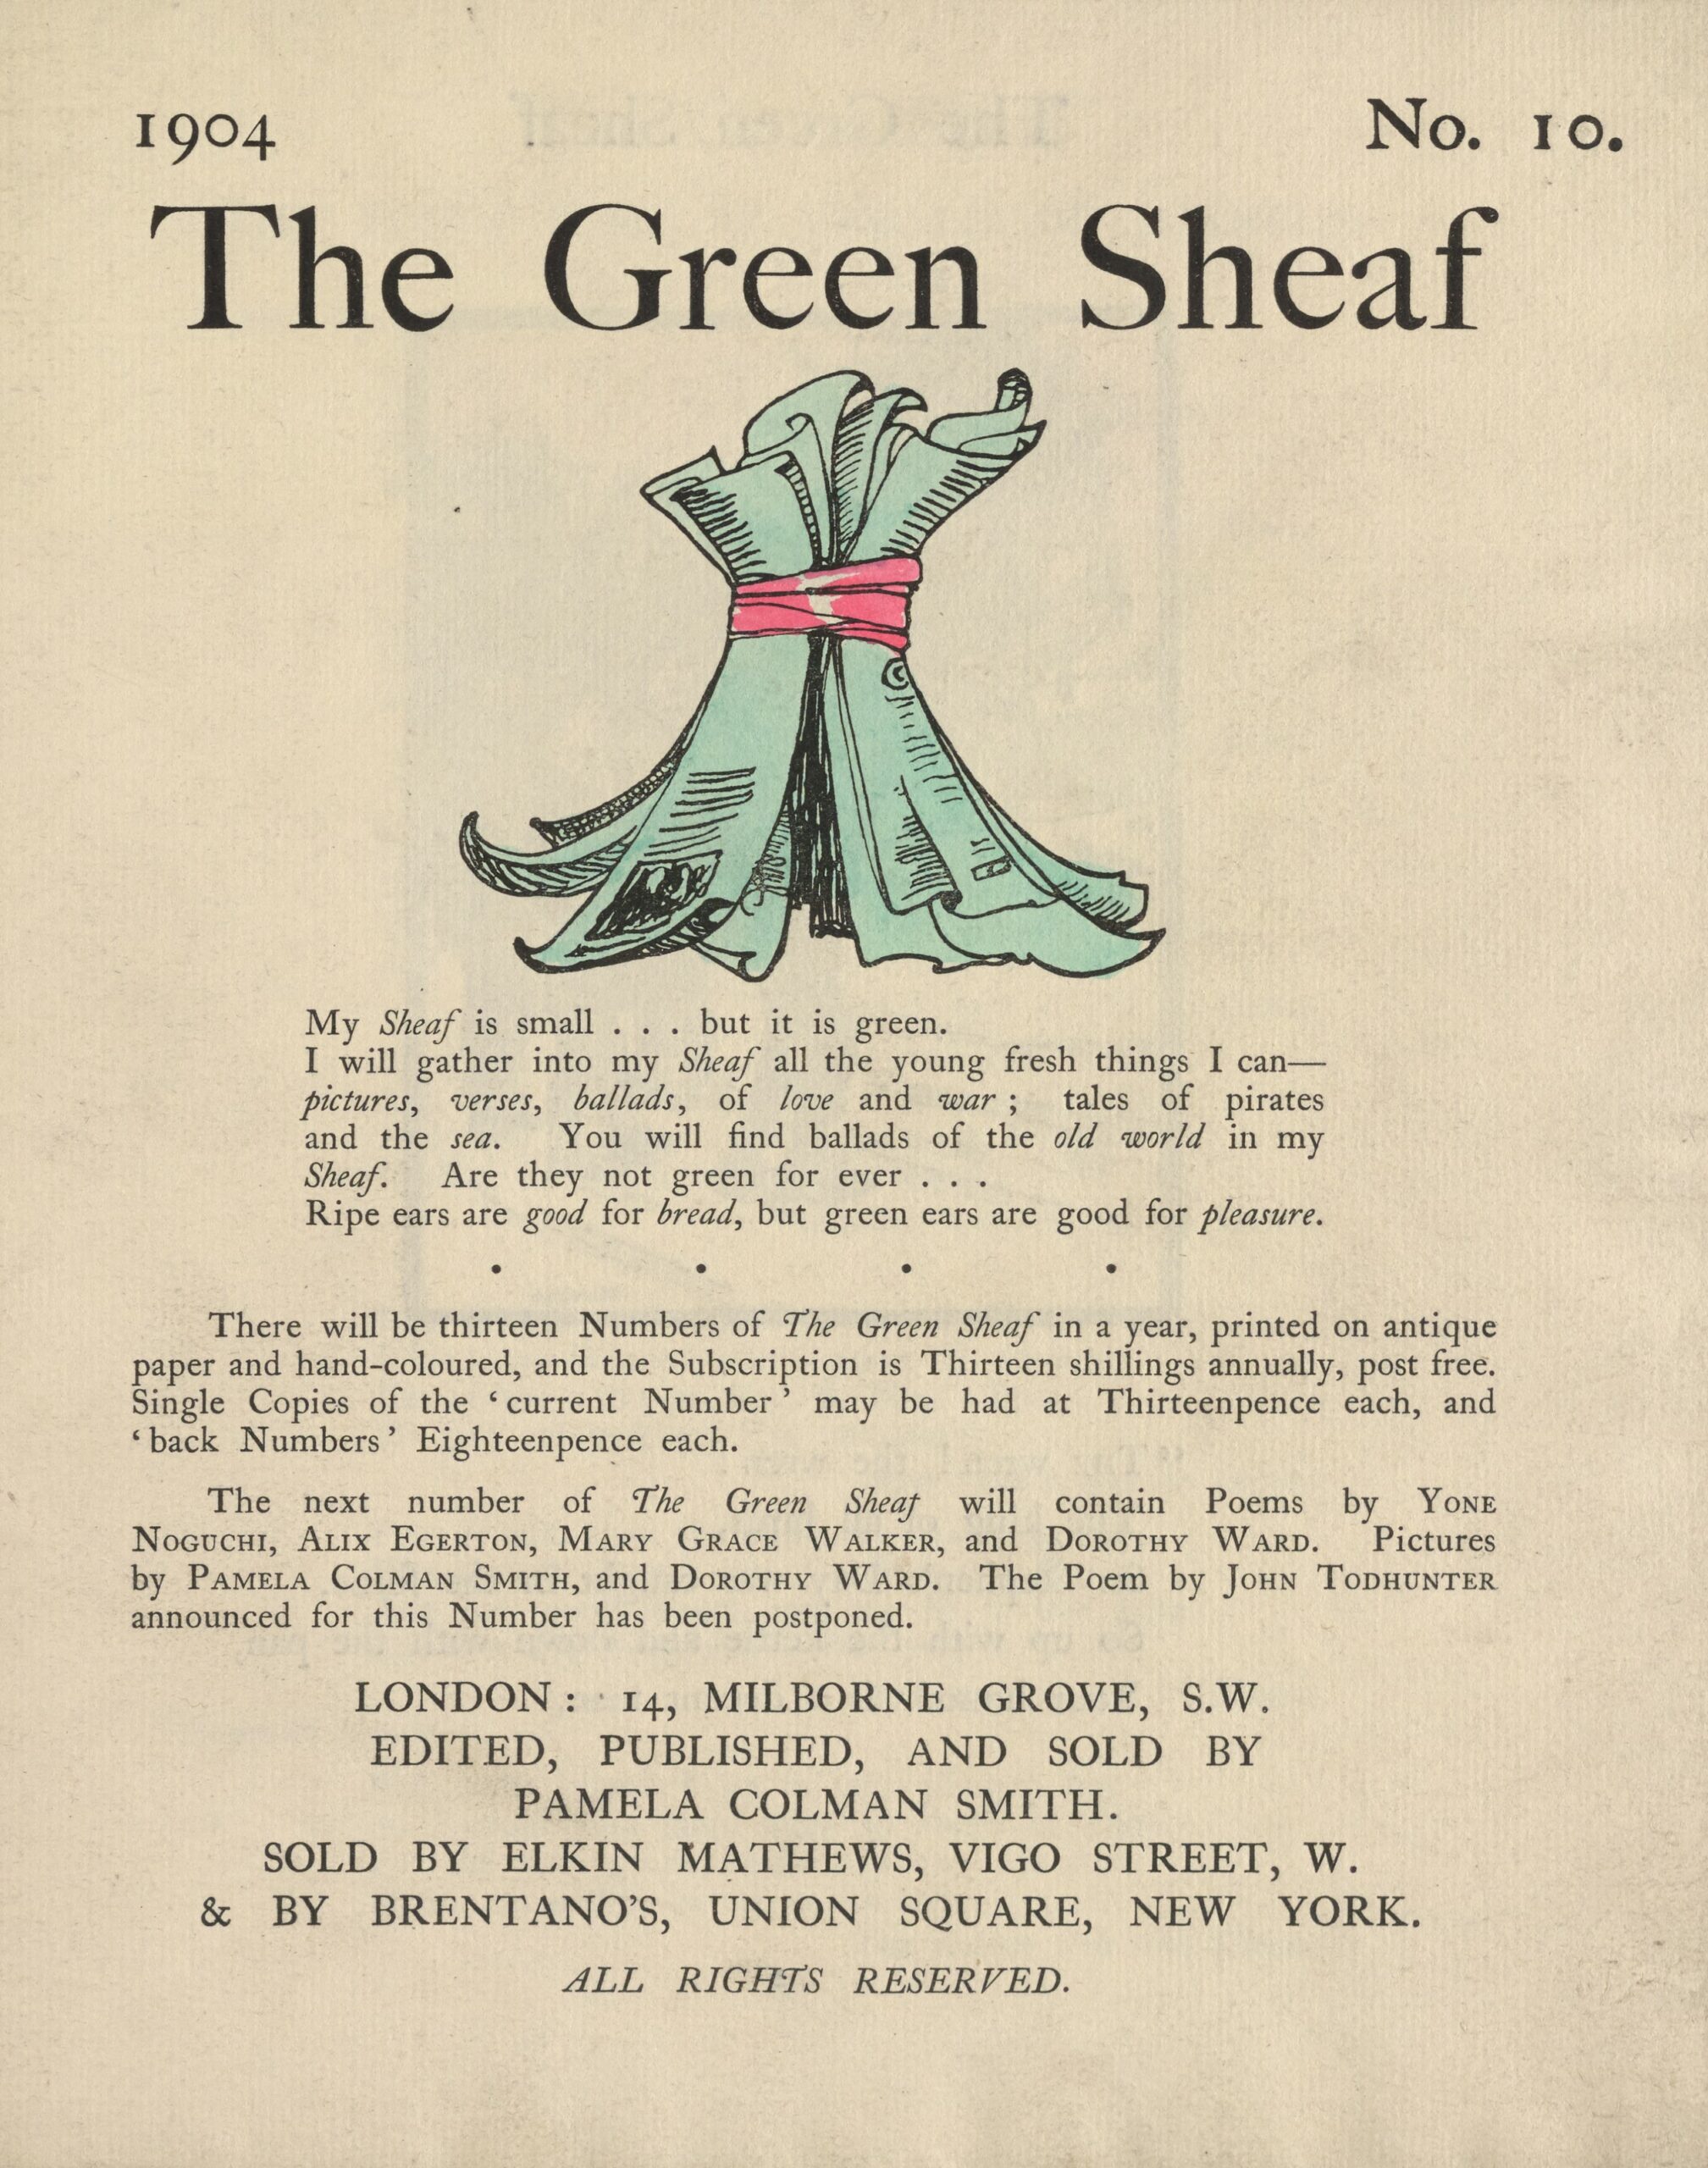 The hand-coloured illustration is centered on the tan page. In the top right corner, the text “No. 10” is printed. Above the illustration, near the top of the page, the text “The Green Sheaf” is printed in black ink in a large serif font. Next follows the illustration of green-coloured printed and illustrated pages, tied together in a sheaf with a red ribbon. The artist’s initialed signature “PCS” is visible on one of the pages. Below the illustration, centered on the page, is the year, 1904, followed, in slightly smaller text, by Smith’s manifesto, first printed at the back of the first volume of The Green Sheaf “My Sheaf is small… but it is green. / I will gather into my Sheaf all the fresh young things I can—pictures, / verses, ballads, of love and war; tales of pirates and the sea. / You will find ballads of the old world in my Sheaf. Are they not / green for ever… / Ripe ears are good for bread, but green ears are good for pleasure.” Beneath this is printed: “There will be thirteen Numbers of The Green Sheaf in a year, printed on antique paper / and hand-coloured, and the Subscription is Thirteen shillings annually, post free. / Single Copies of the ‘current Number’ may be had at Thirteenpence each, and / ‘back Numbers’ Eighteenpence each. / The next number of The Green Sheaf will contain Poems by Yone / Noguchi, Alix Egerton, Mary Grace Walker, and Dorothy Ward. Pictures / by Pamela Colman Smith, and Dorothy Ward. The Poem by John Todhunter / announced for this Number has been postponed.” Below this is the magazine’s printing information, centred: “LONDON / EDITED, PUBLISHED AND SOLD BY / PAMELA COLMAN SMITH / & SOLD BY ELKIN MATTHEWS, VIGO STREET, W. / & BY BRENTANO’S, UNION SQUARE, NEW YORK. / ALL RIGHTS RESERVED.”